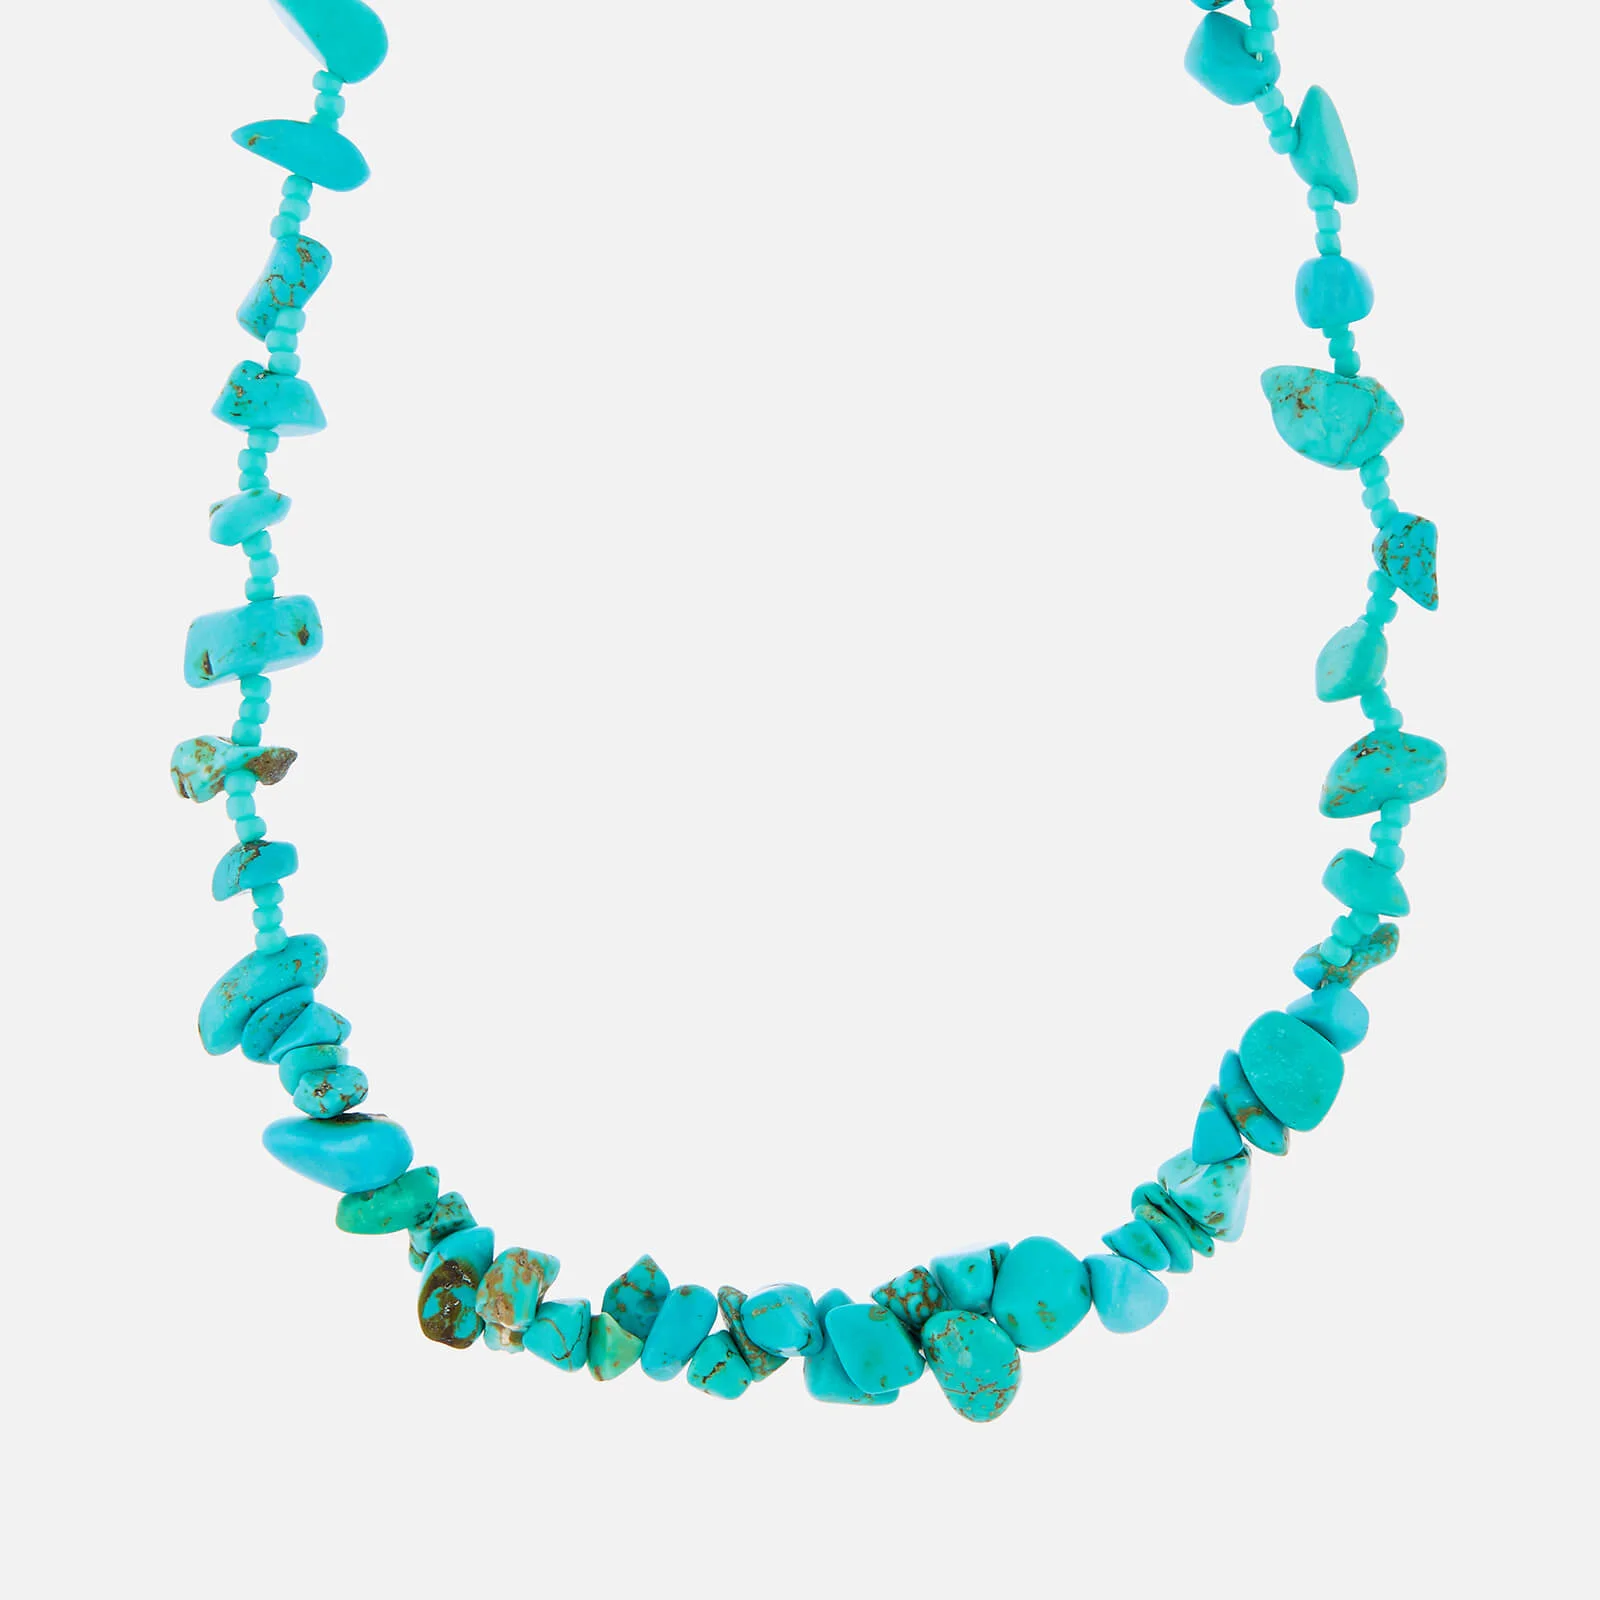 Anni Lu Women's Reef Necklace - Biscay Bay Image 1